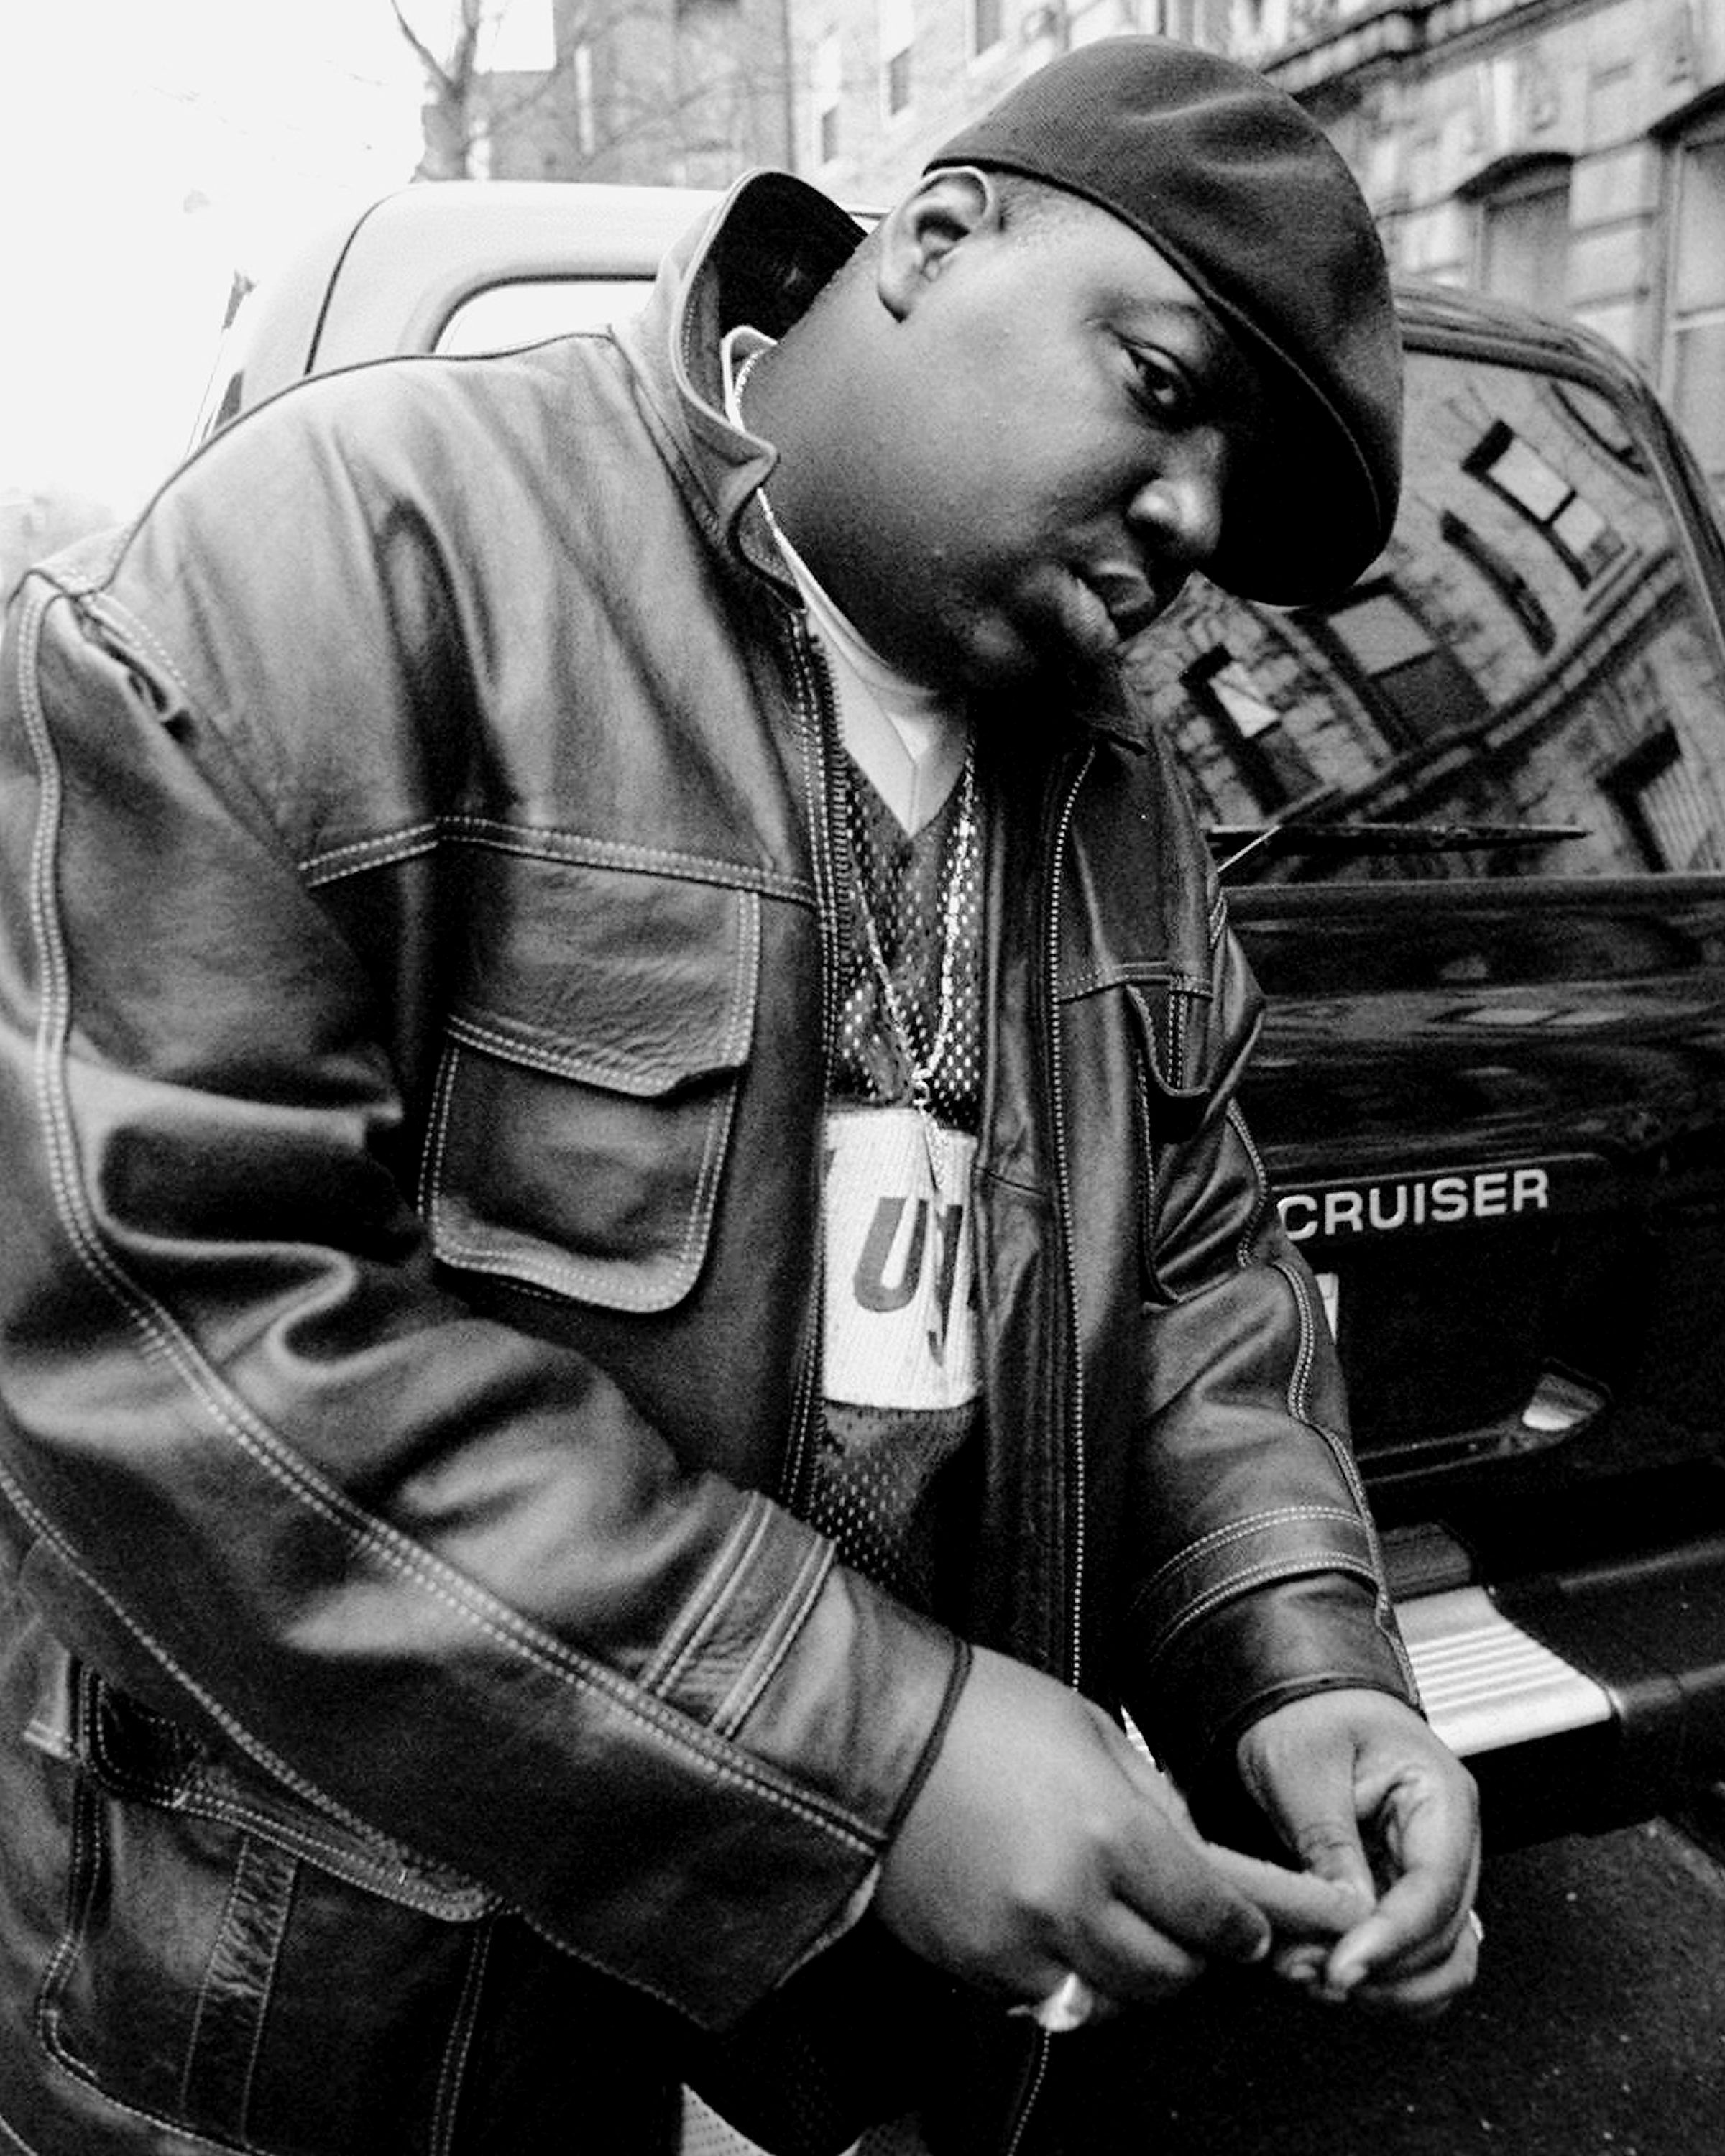 FBI Releases Notorious B.I.G.’s Murder Files to Public